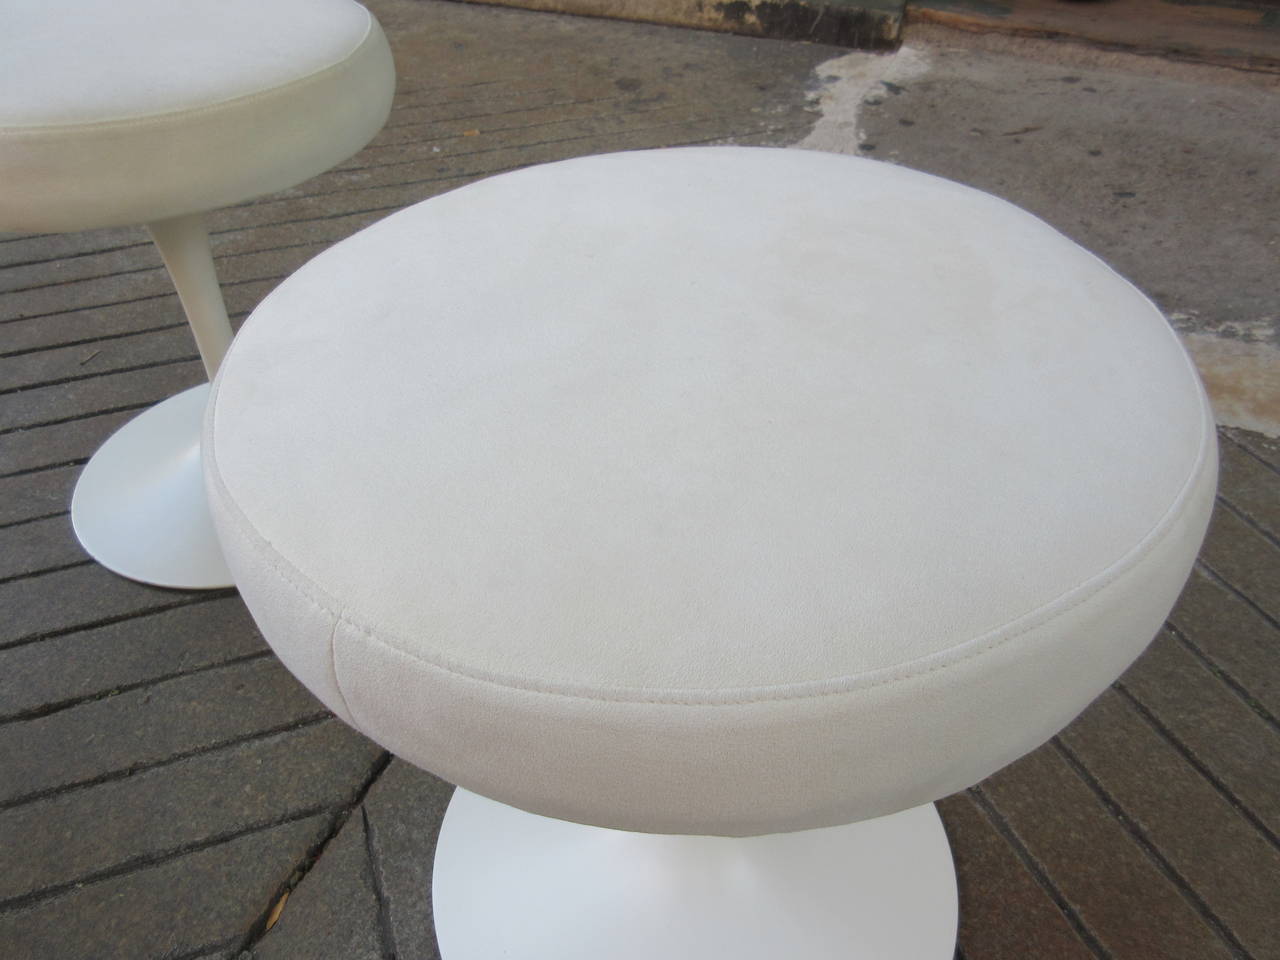 Knoll Saarinen stools with white ultra-suede three available. Bought from original owners. Specified by Hugh Newell Jacobsen's Architect of 